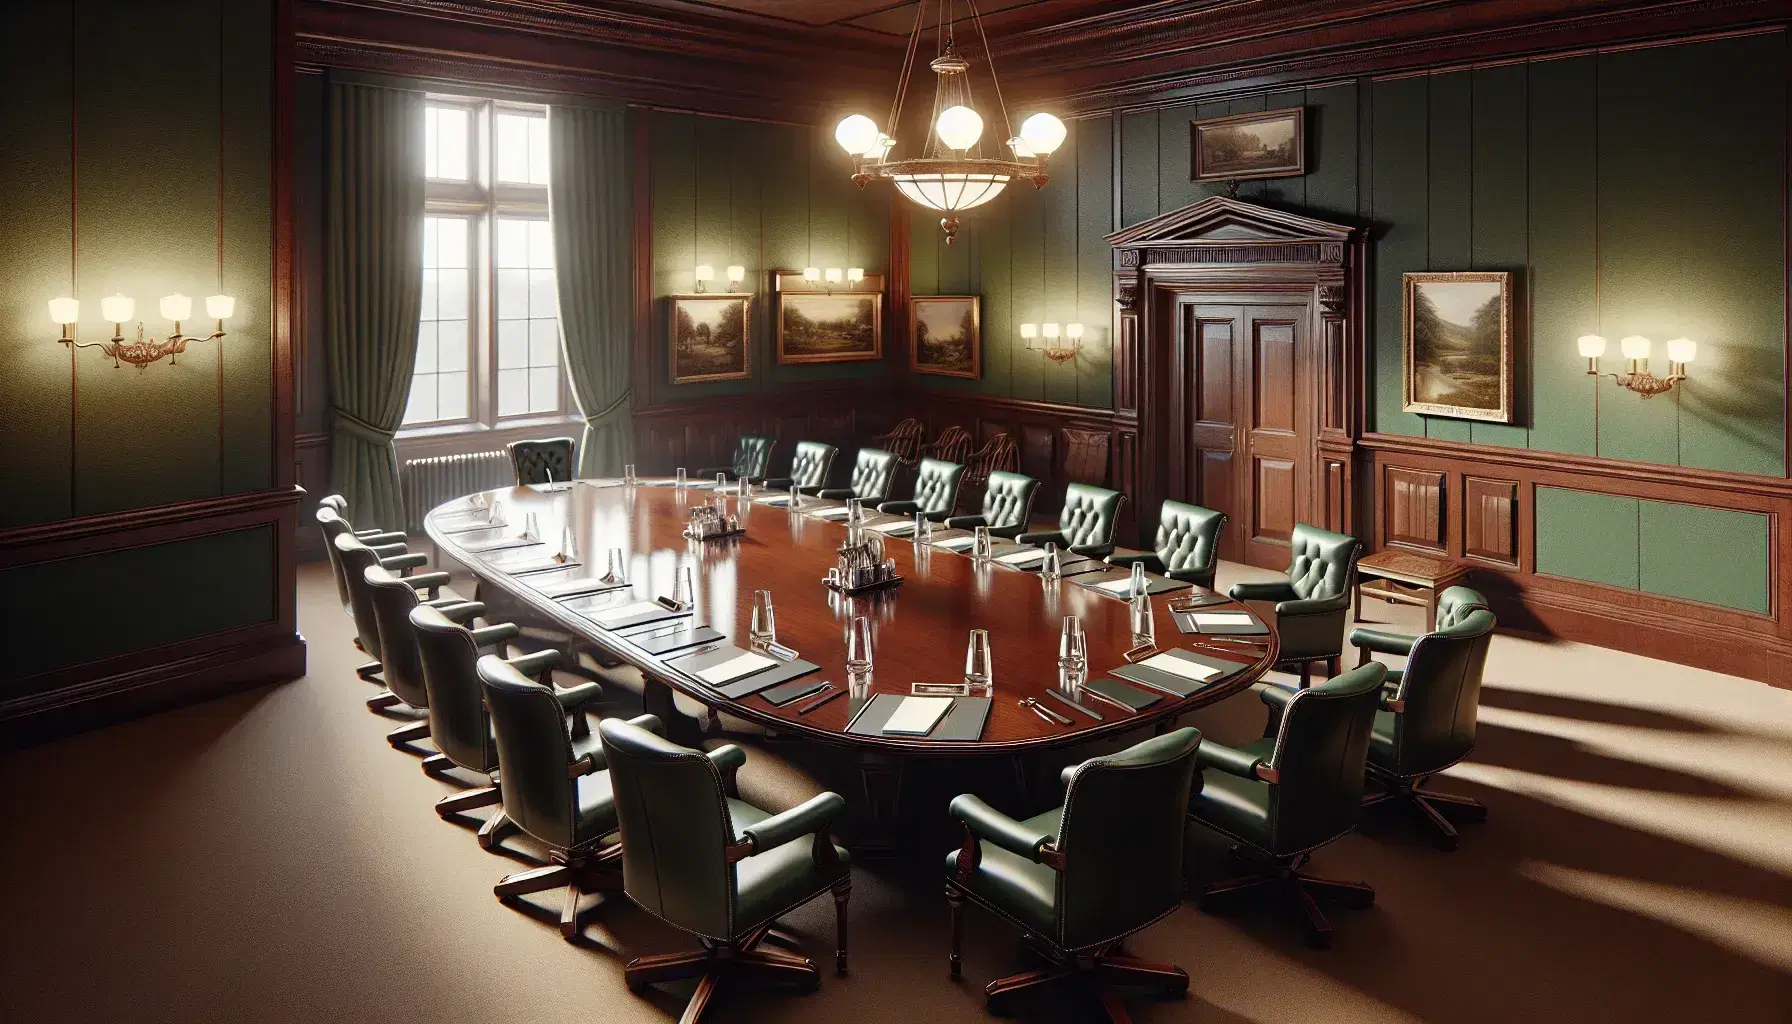 Elegant meeting room with a large oval wooden table, green leather chairs, mahogany walls, and historical paintings under a warm chandelier glow.